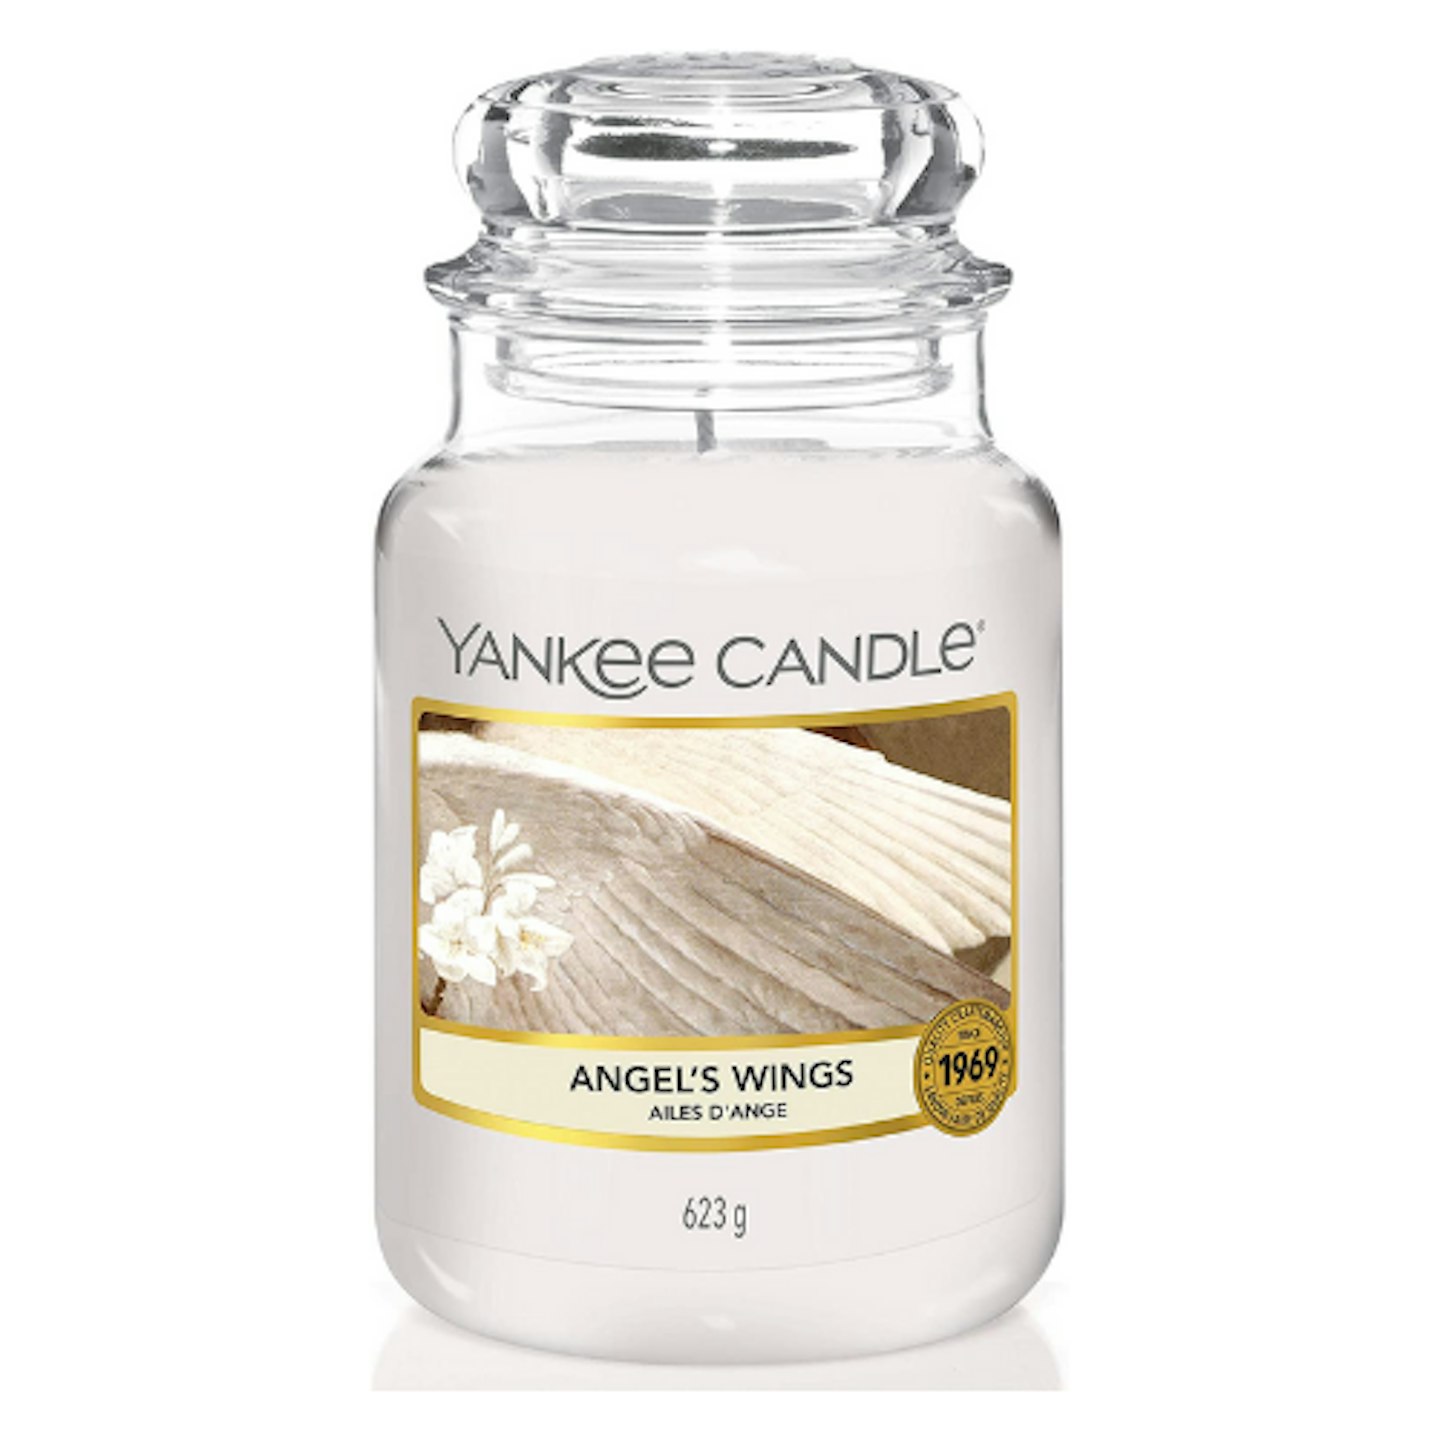 Angel's Wings Large Jar Candle